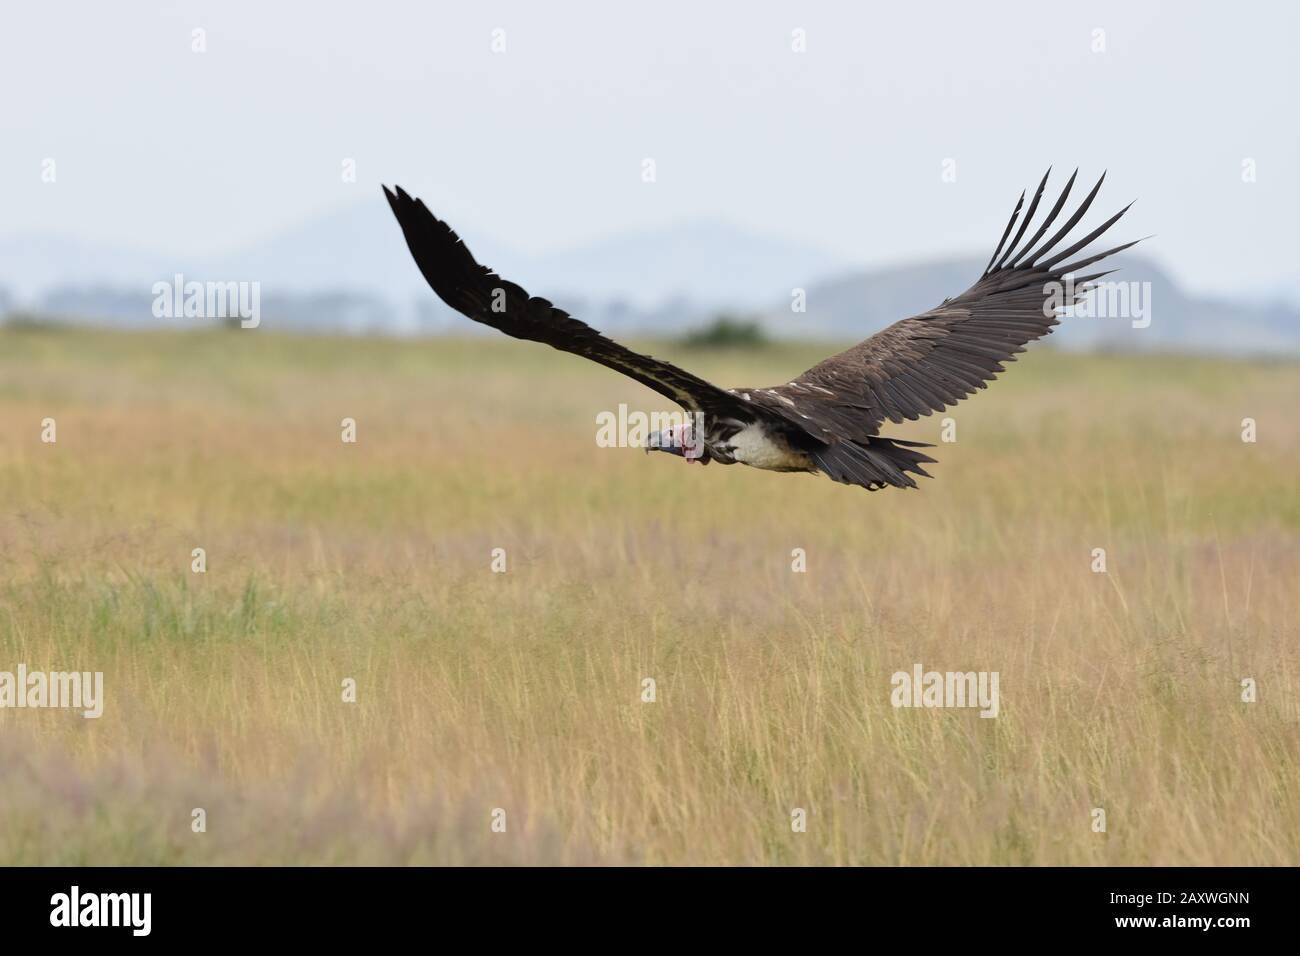 Lappet-faced vulture in low flight, wings outstretched. Amboseli National Park, Kenya. Stock Photo